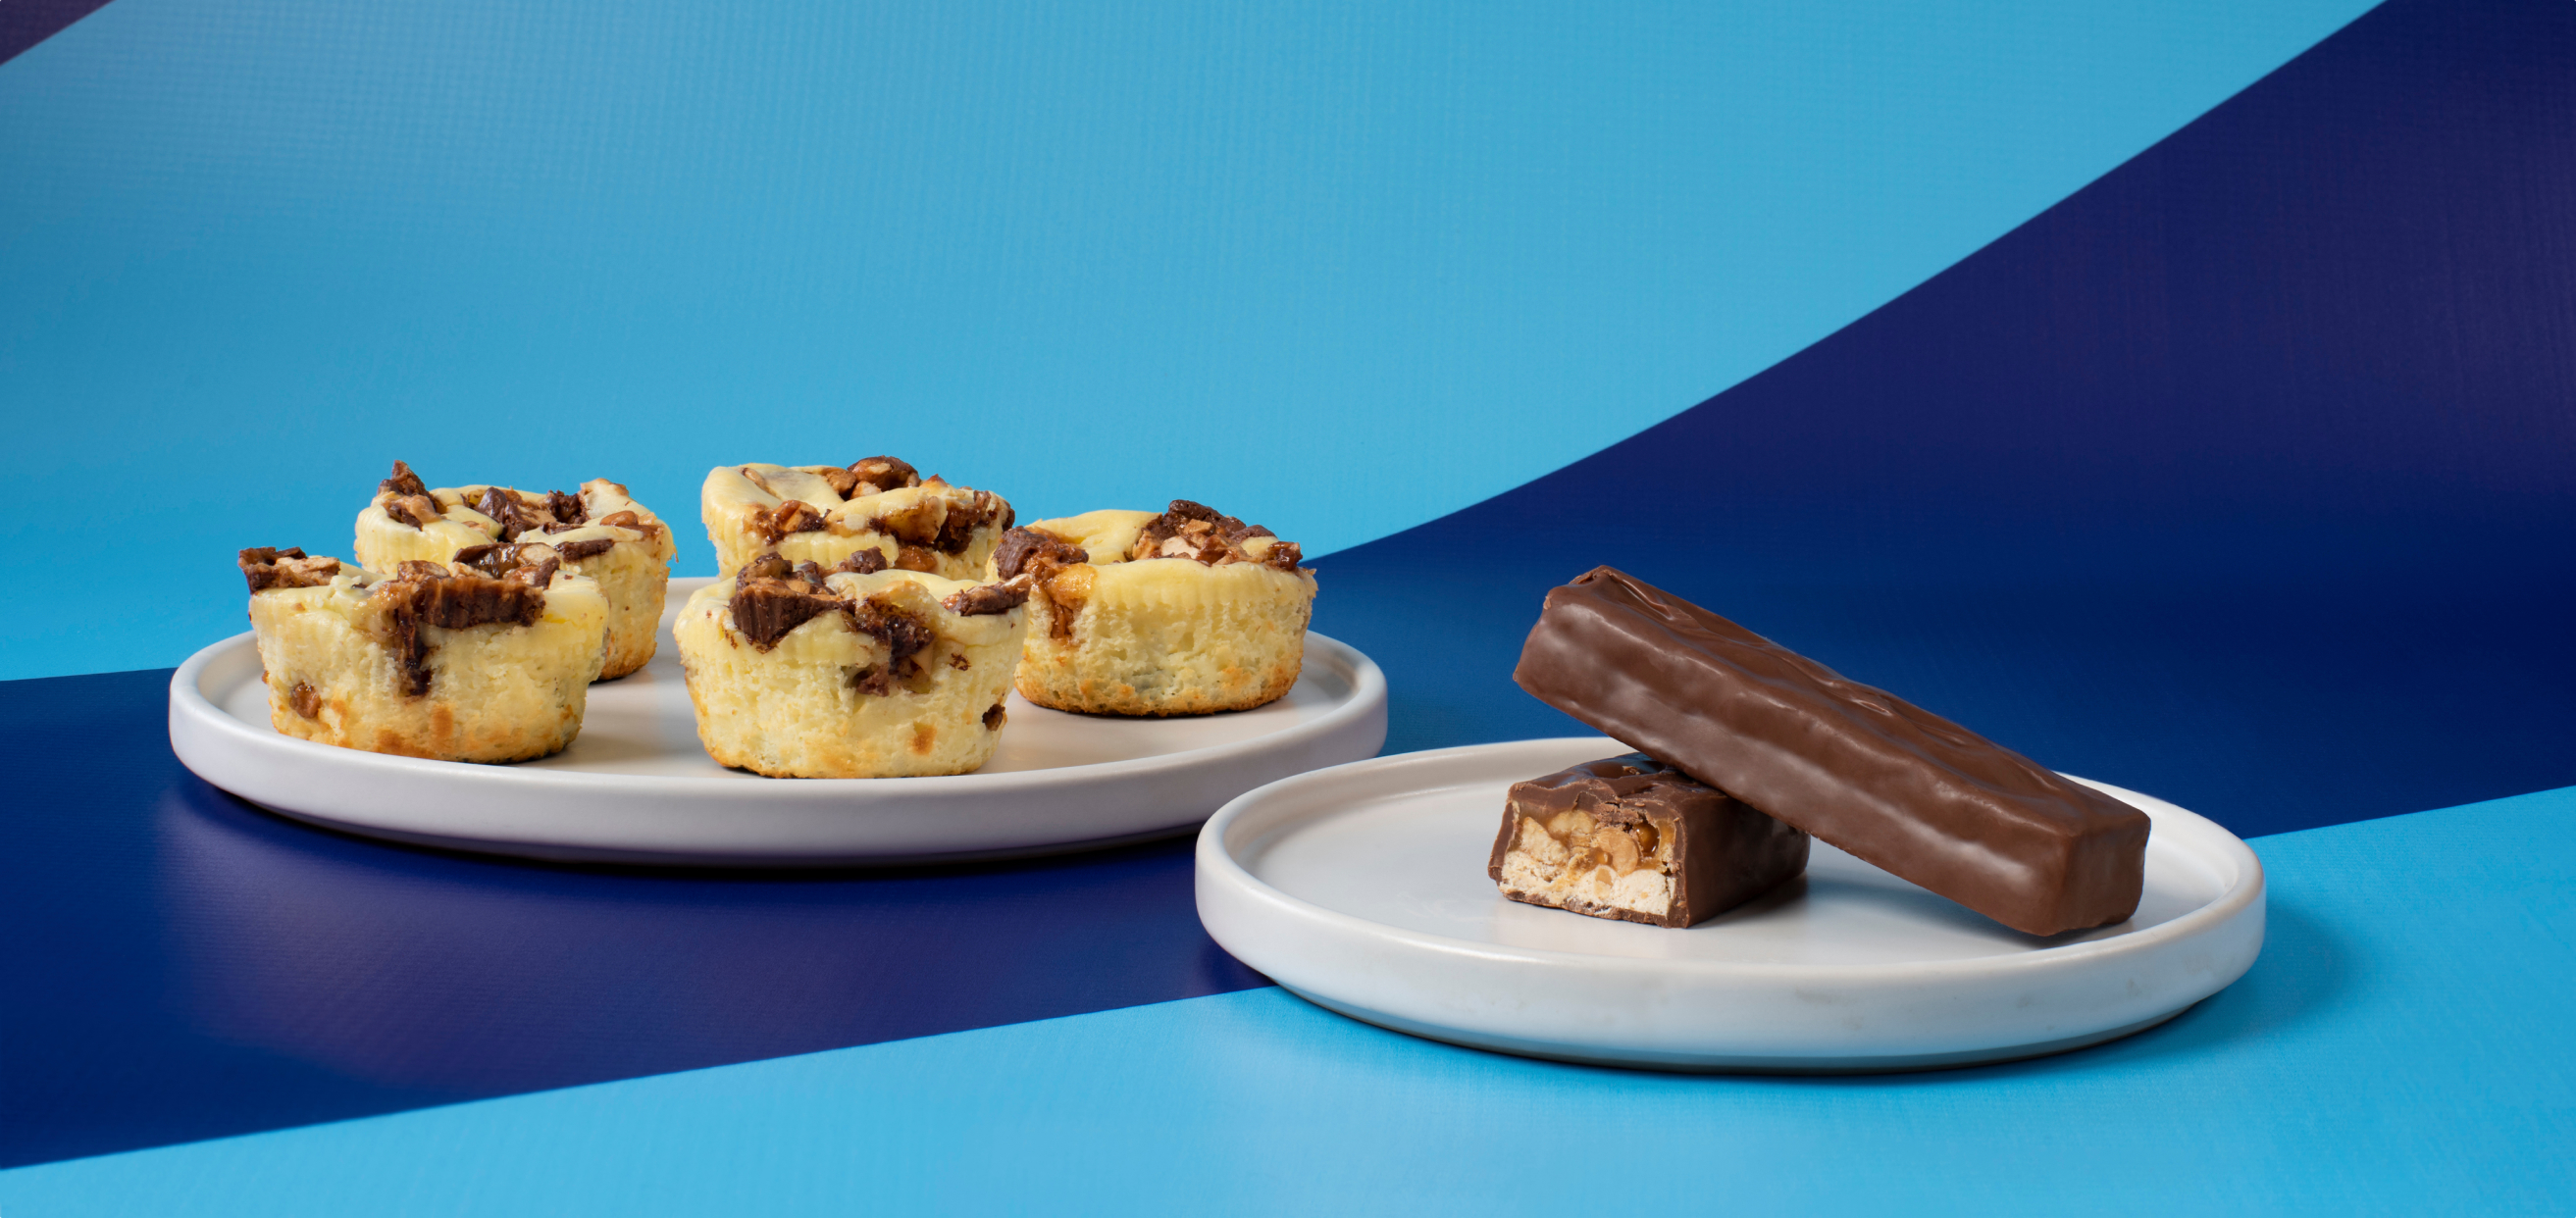 Snickers cheesecake cups next to cross section of a classic snickers bar